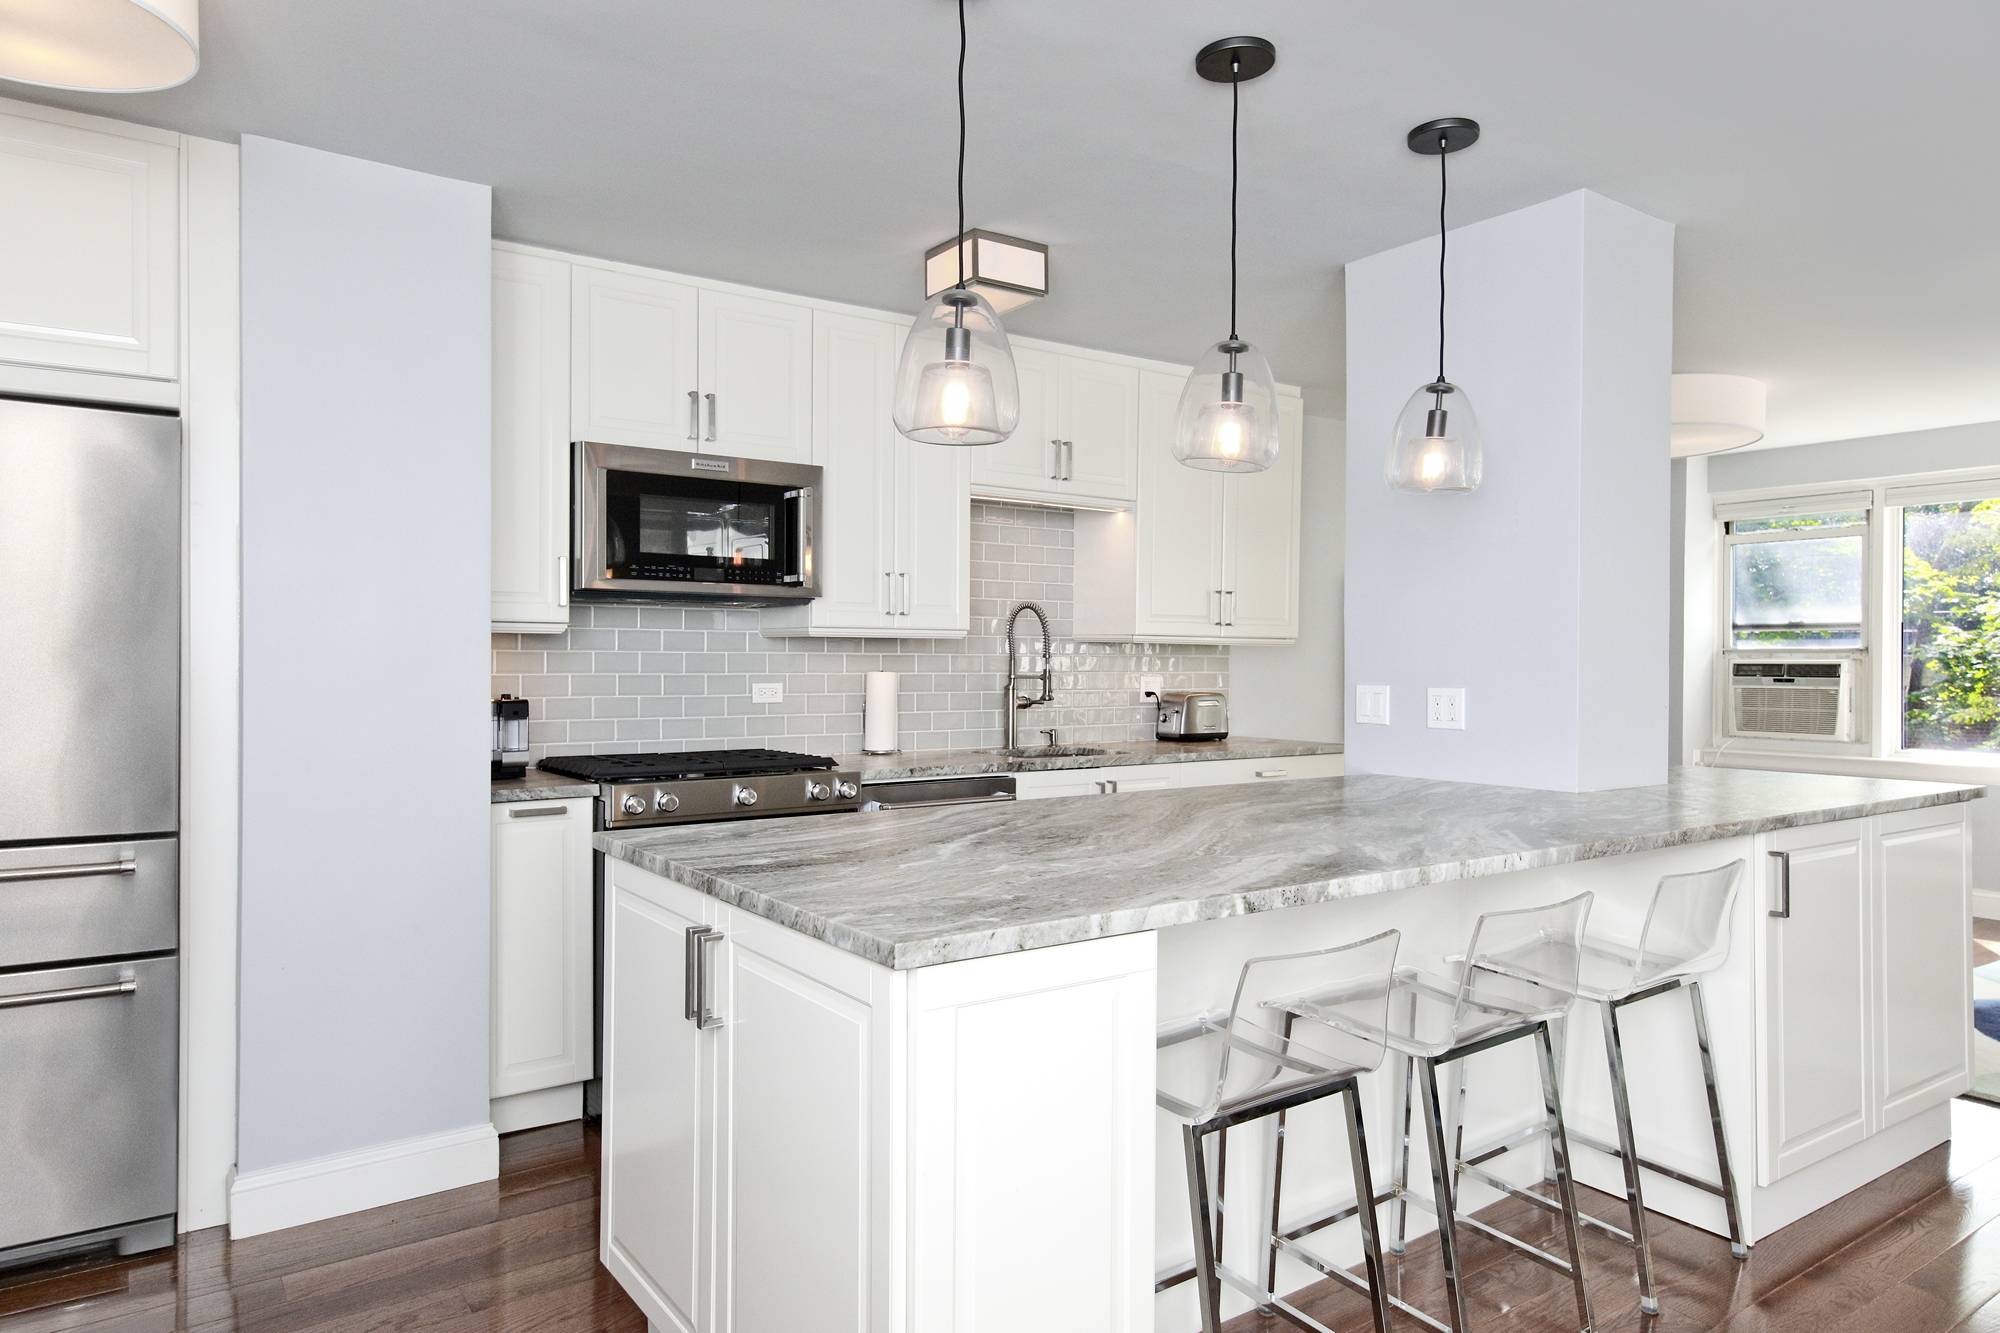 Welcome home to this stunning one of a kind fully remodeled 2 bedroom at the Briar Oaks, a mid century full service luxury co op located in Central Riverdale.